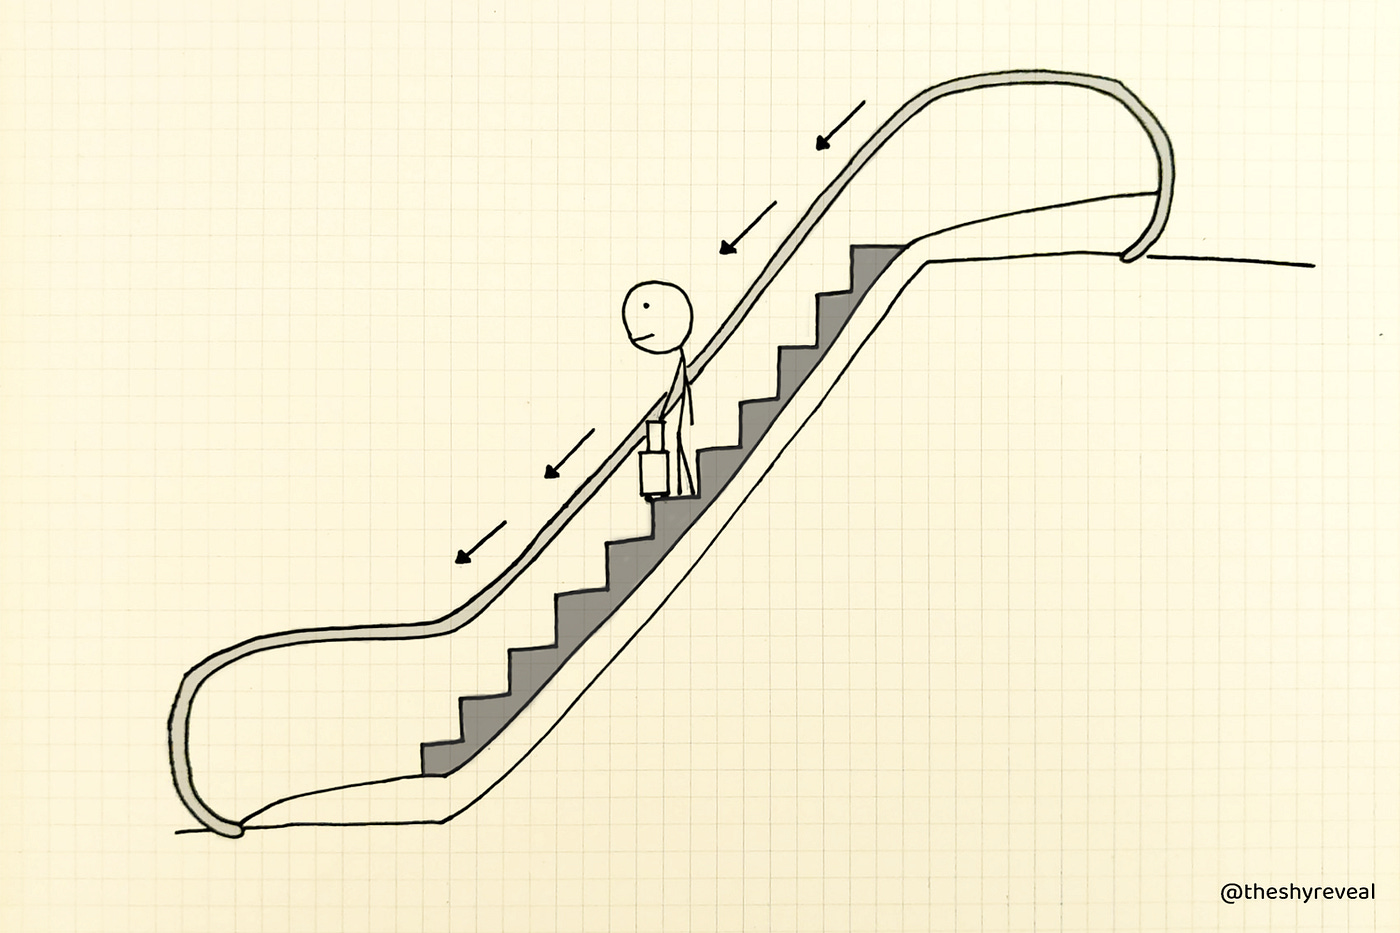 Drawing of a stick figure going down the escalator.